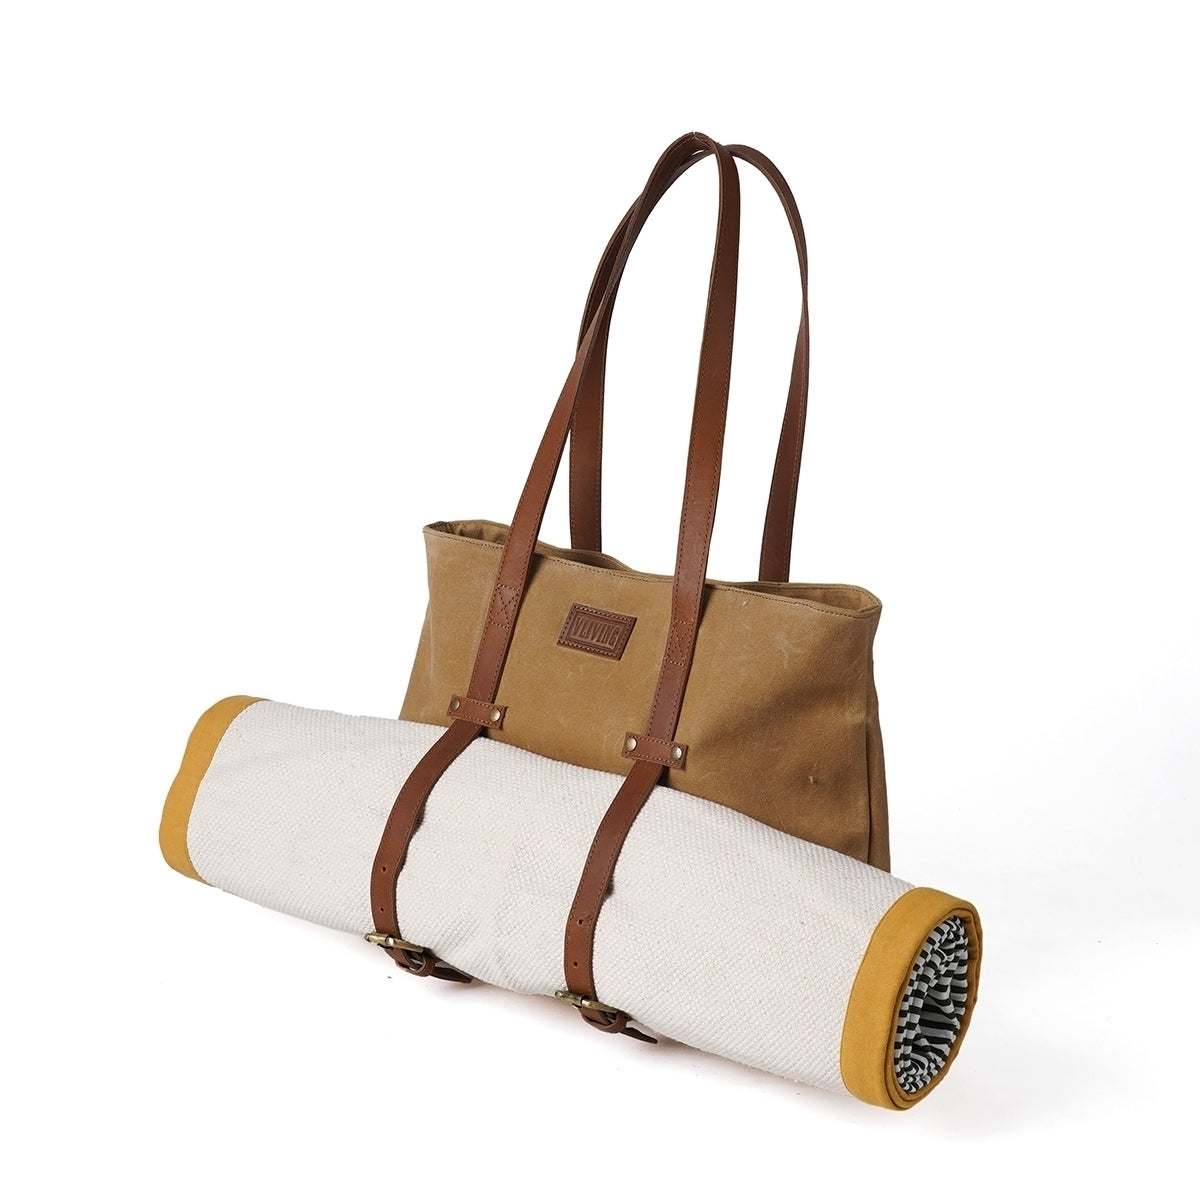 Sand Brown waxed canvas yoga bag, gym bag, leather adjustable straps, 16X13X4 inches